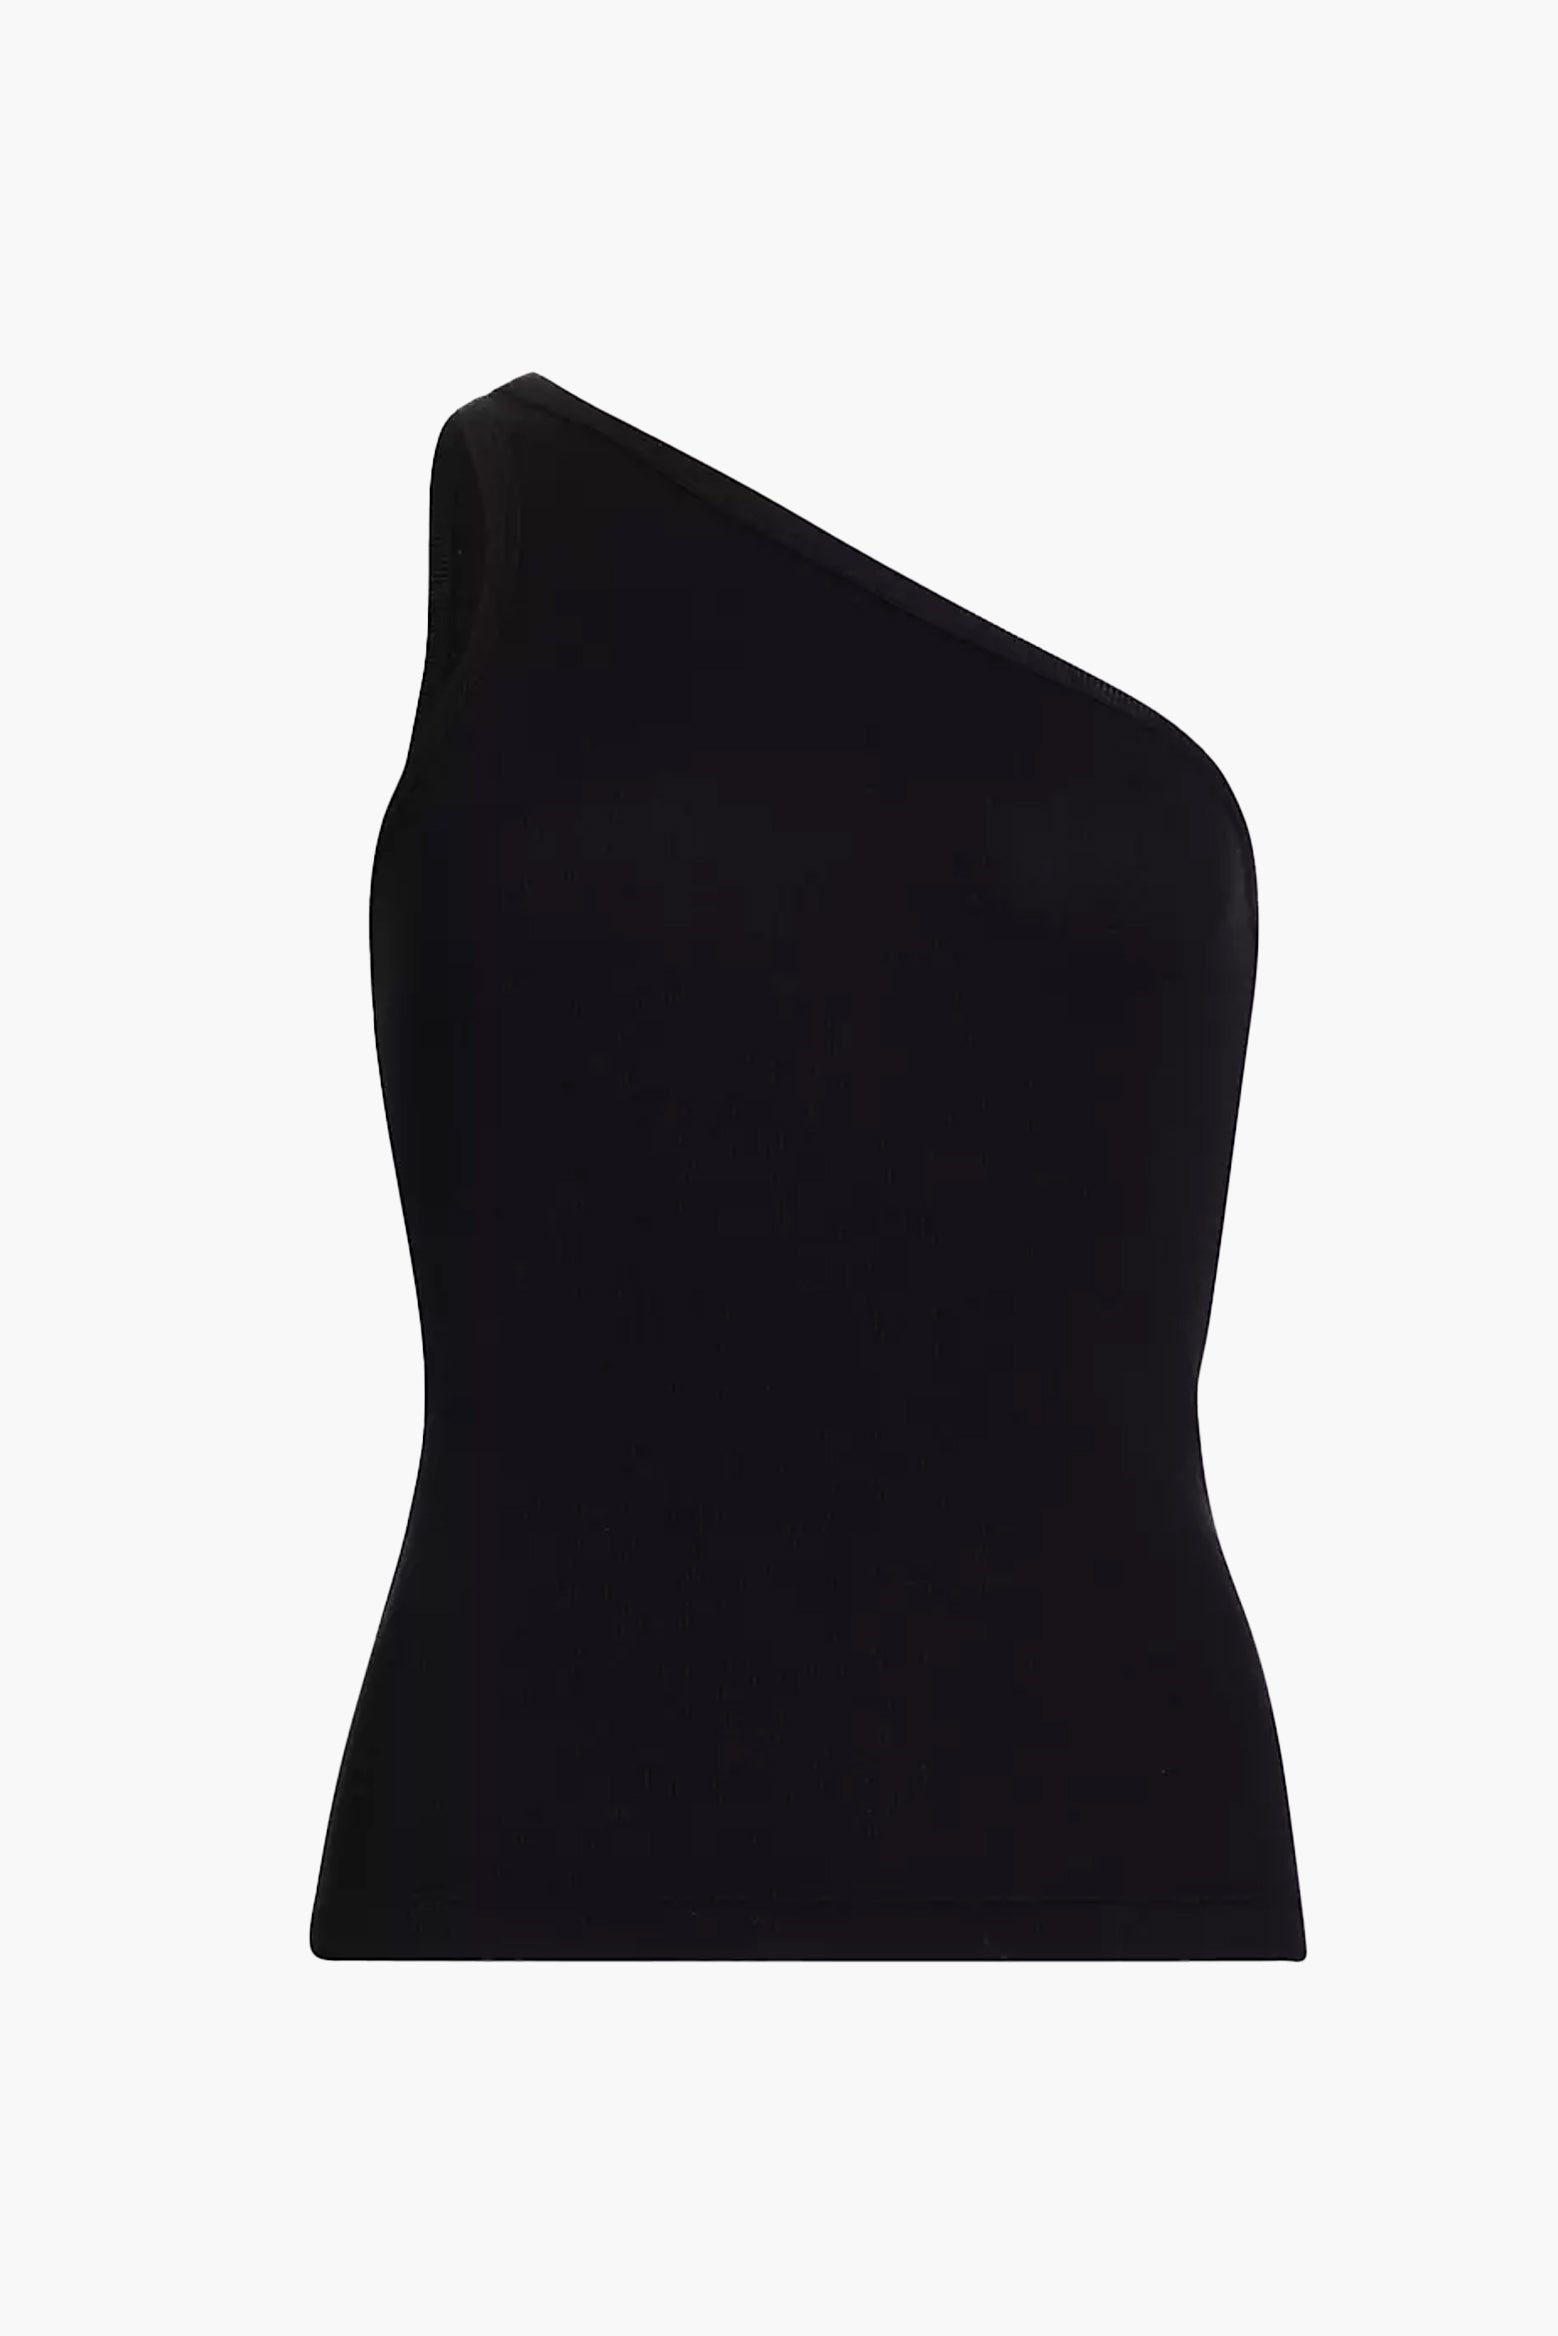 Agolde Brita Tank Top in Black available at The New Trend Australia. 